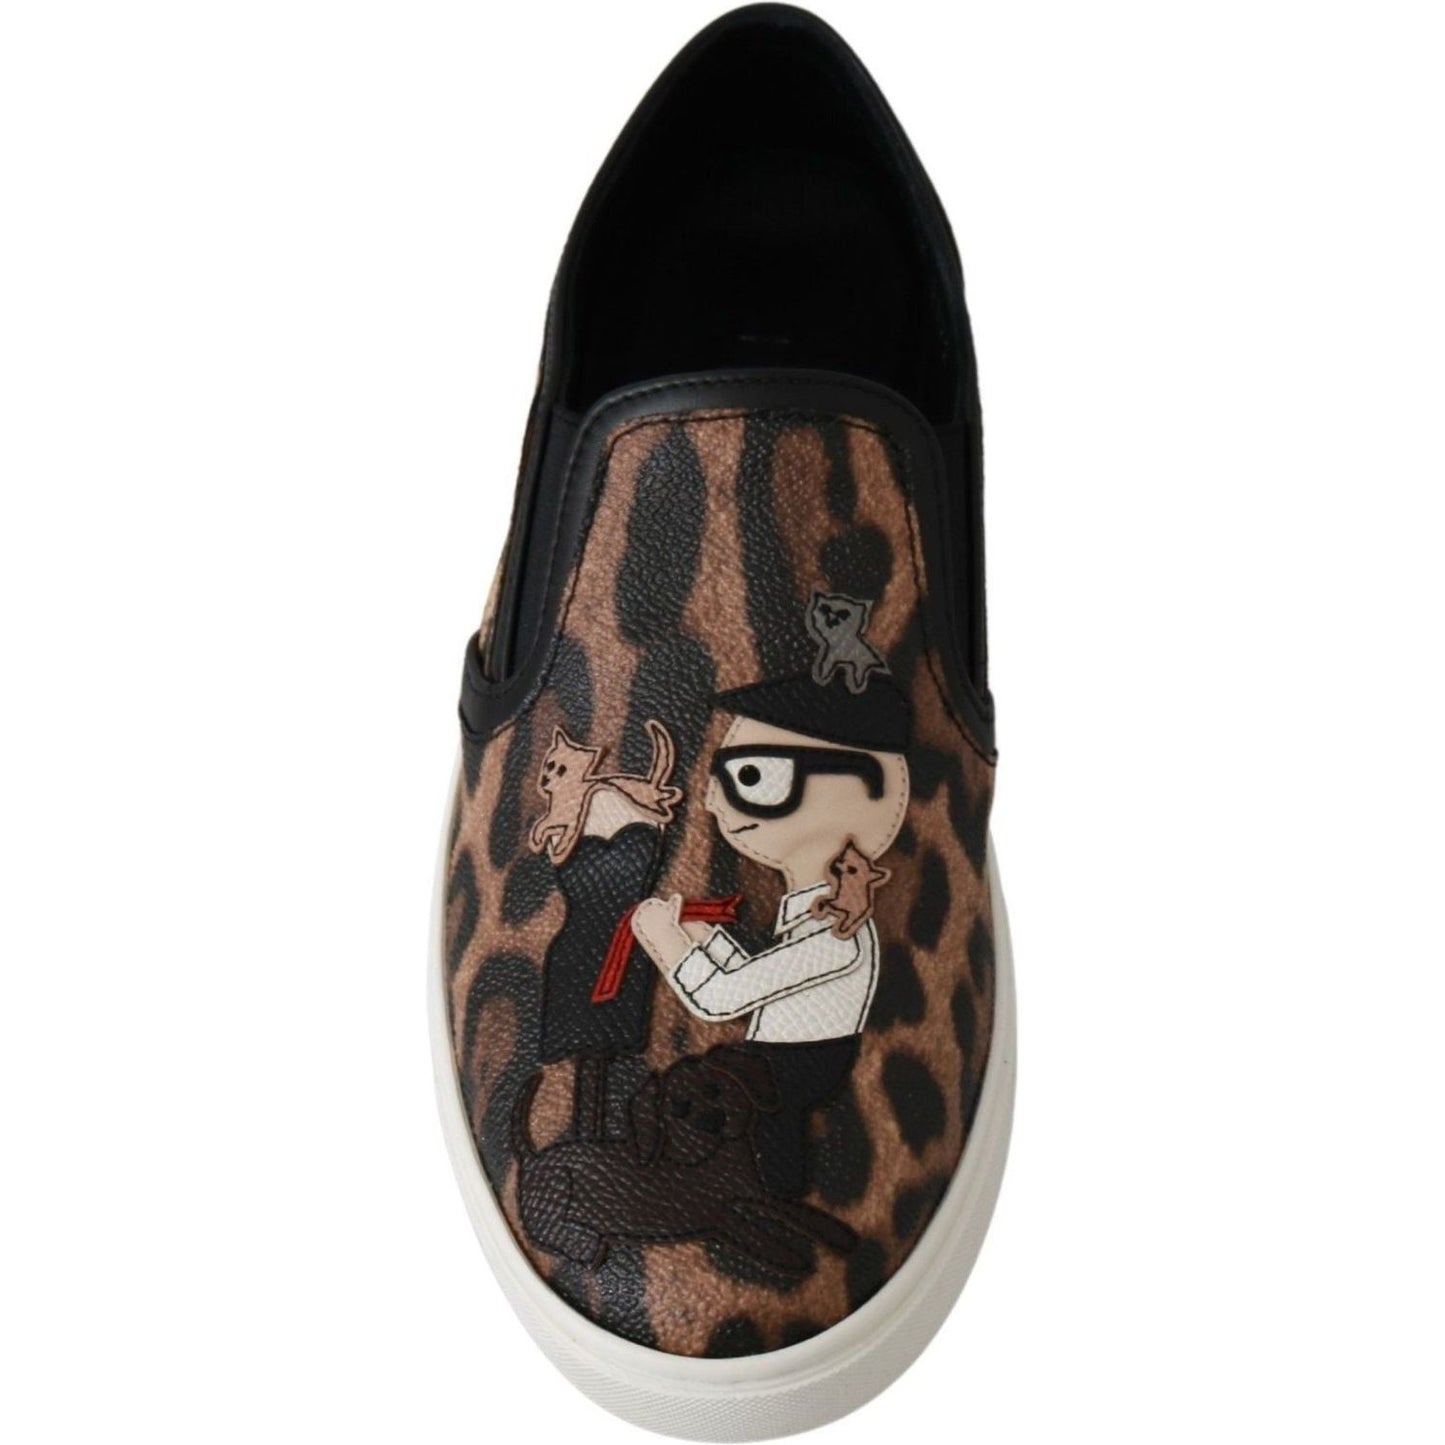 Dolce & Gabbana Chic Leopard Print Loafers for Elegant Comfort leather-leopard-dgfamily-loafers-shoes IMG_3469-0ec6627b-07b.jpg